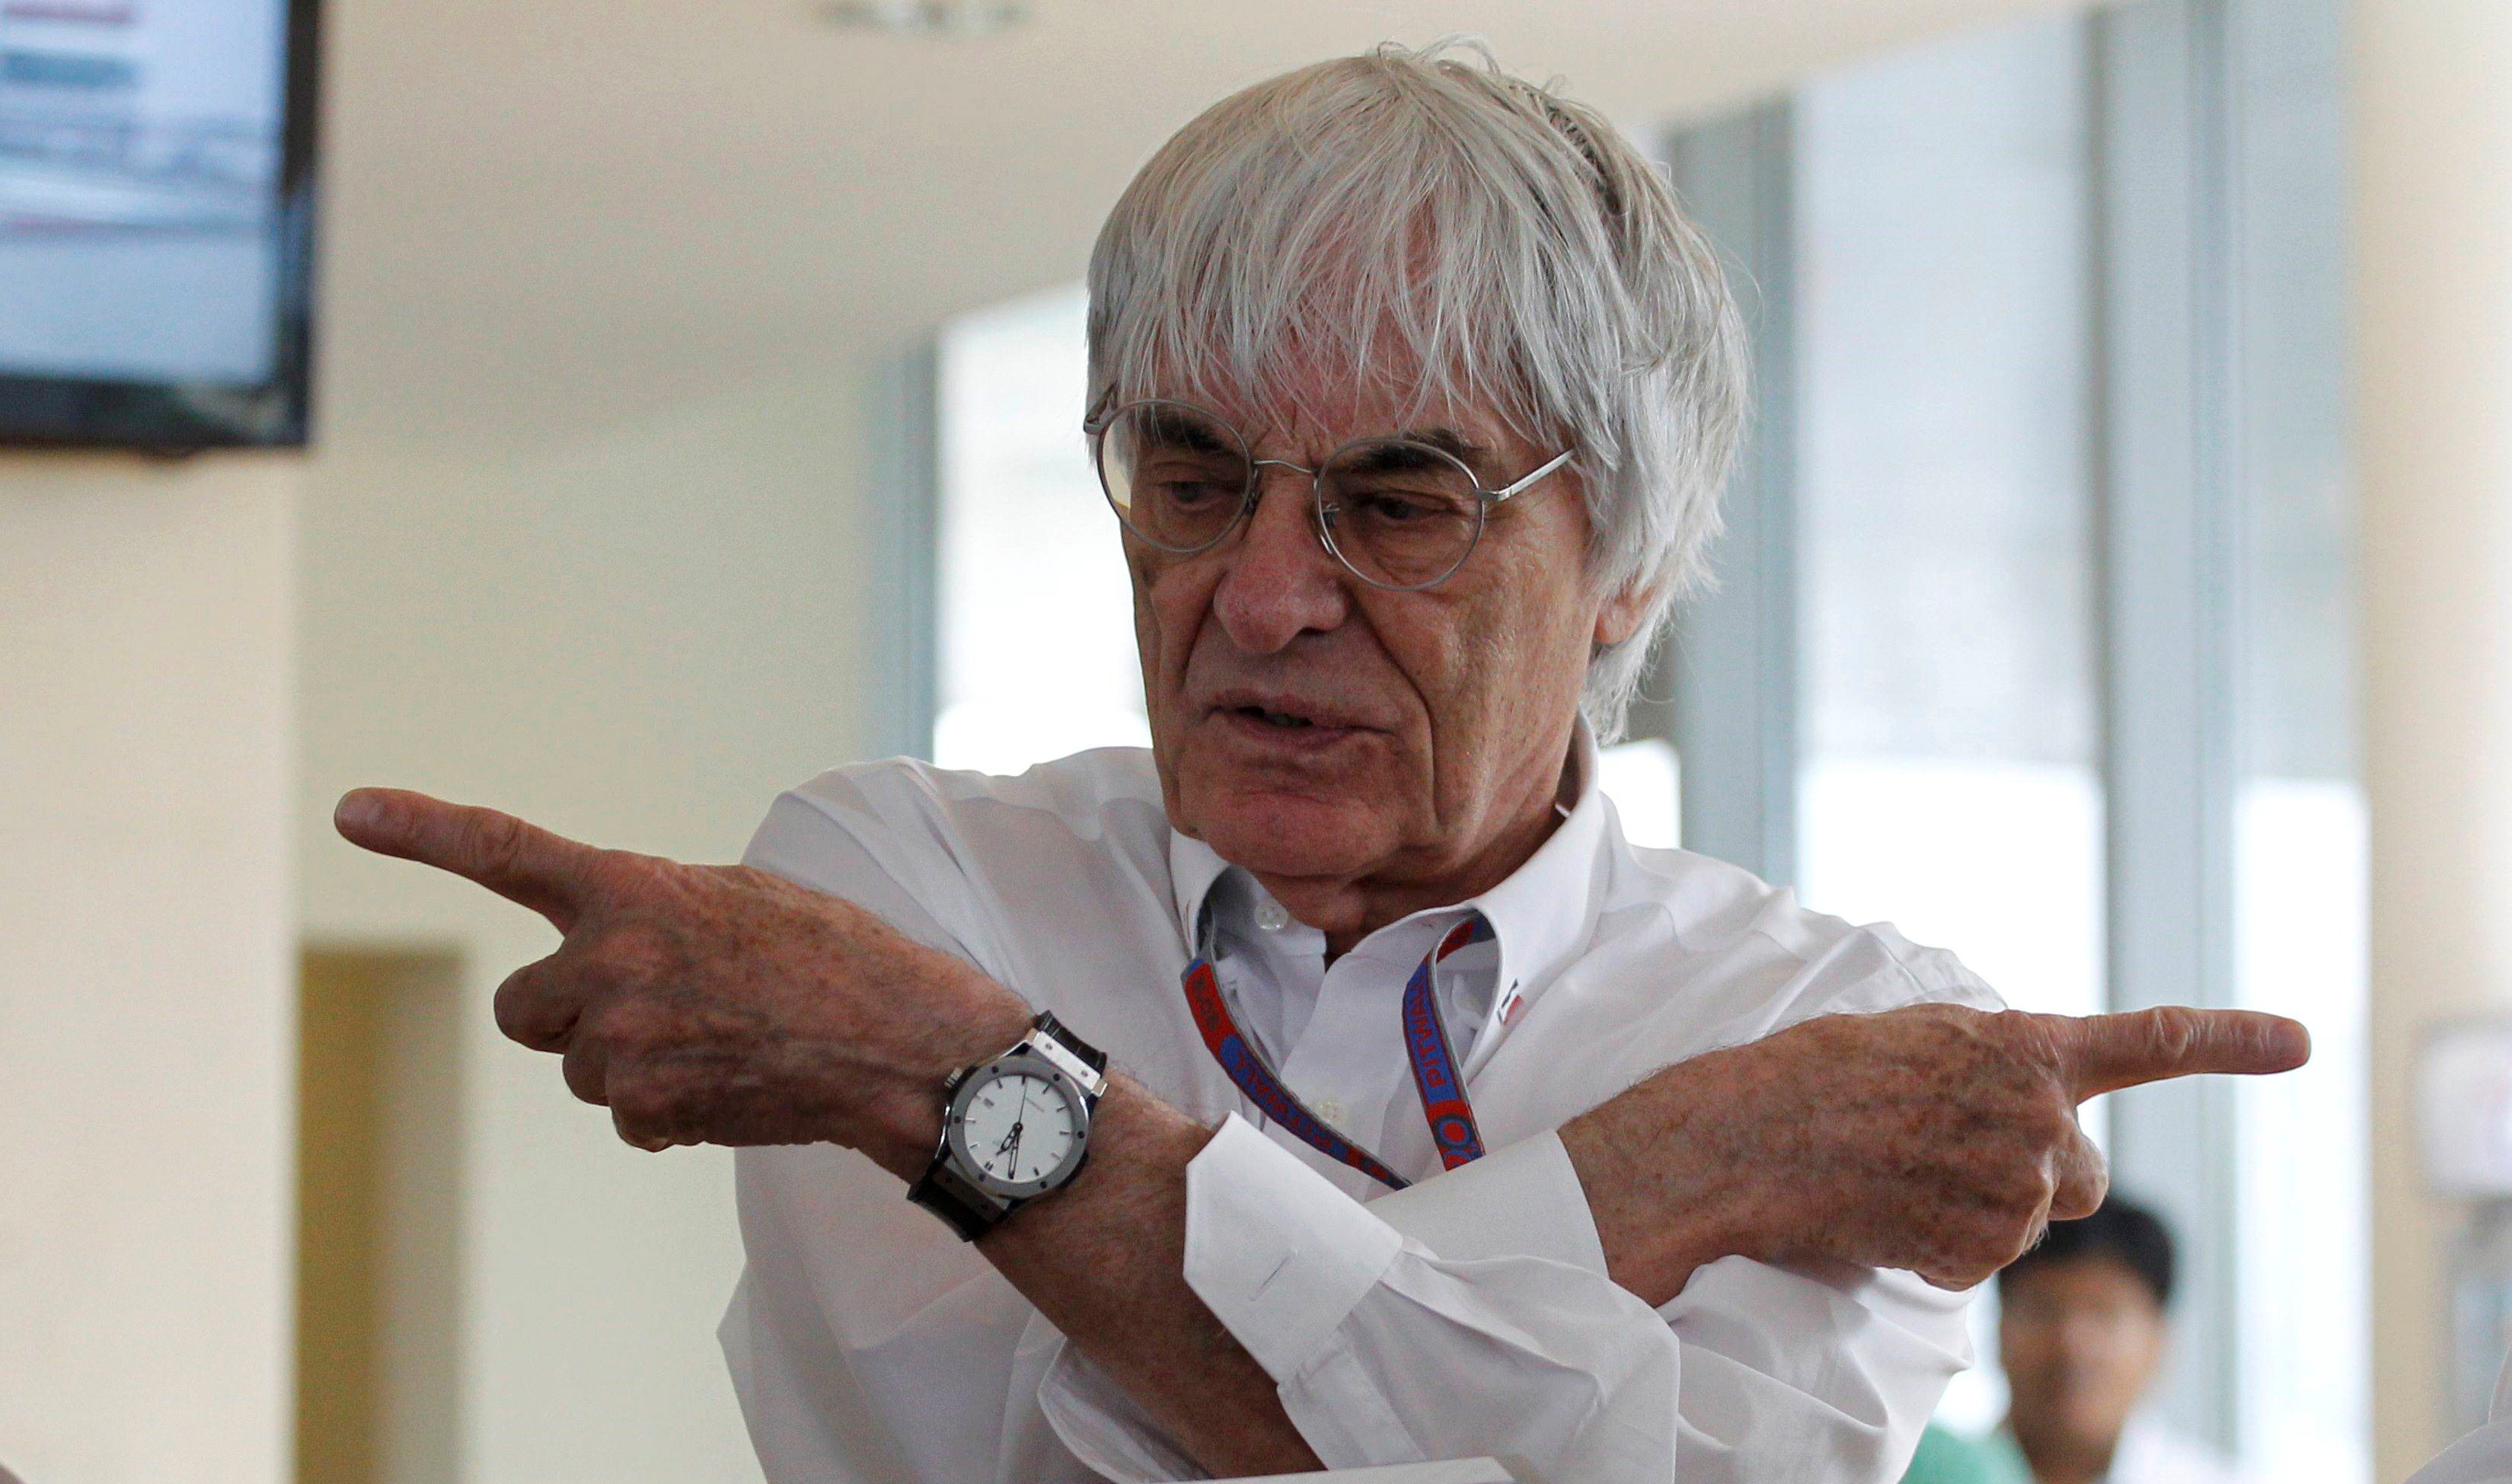 Formula One supremo Bernie Ecclestone gestures during the presentation of a commemorative book presented to him on the occasion of his birthday at the Indian F1 Grand Prix at the Buddh International Circuit in Greater Noida